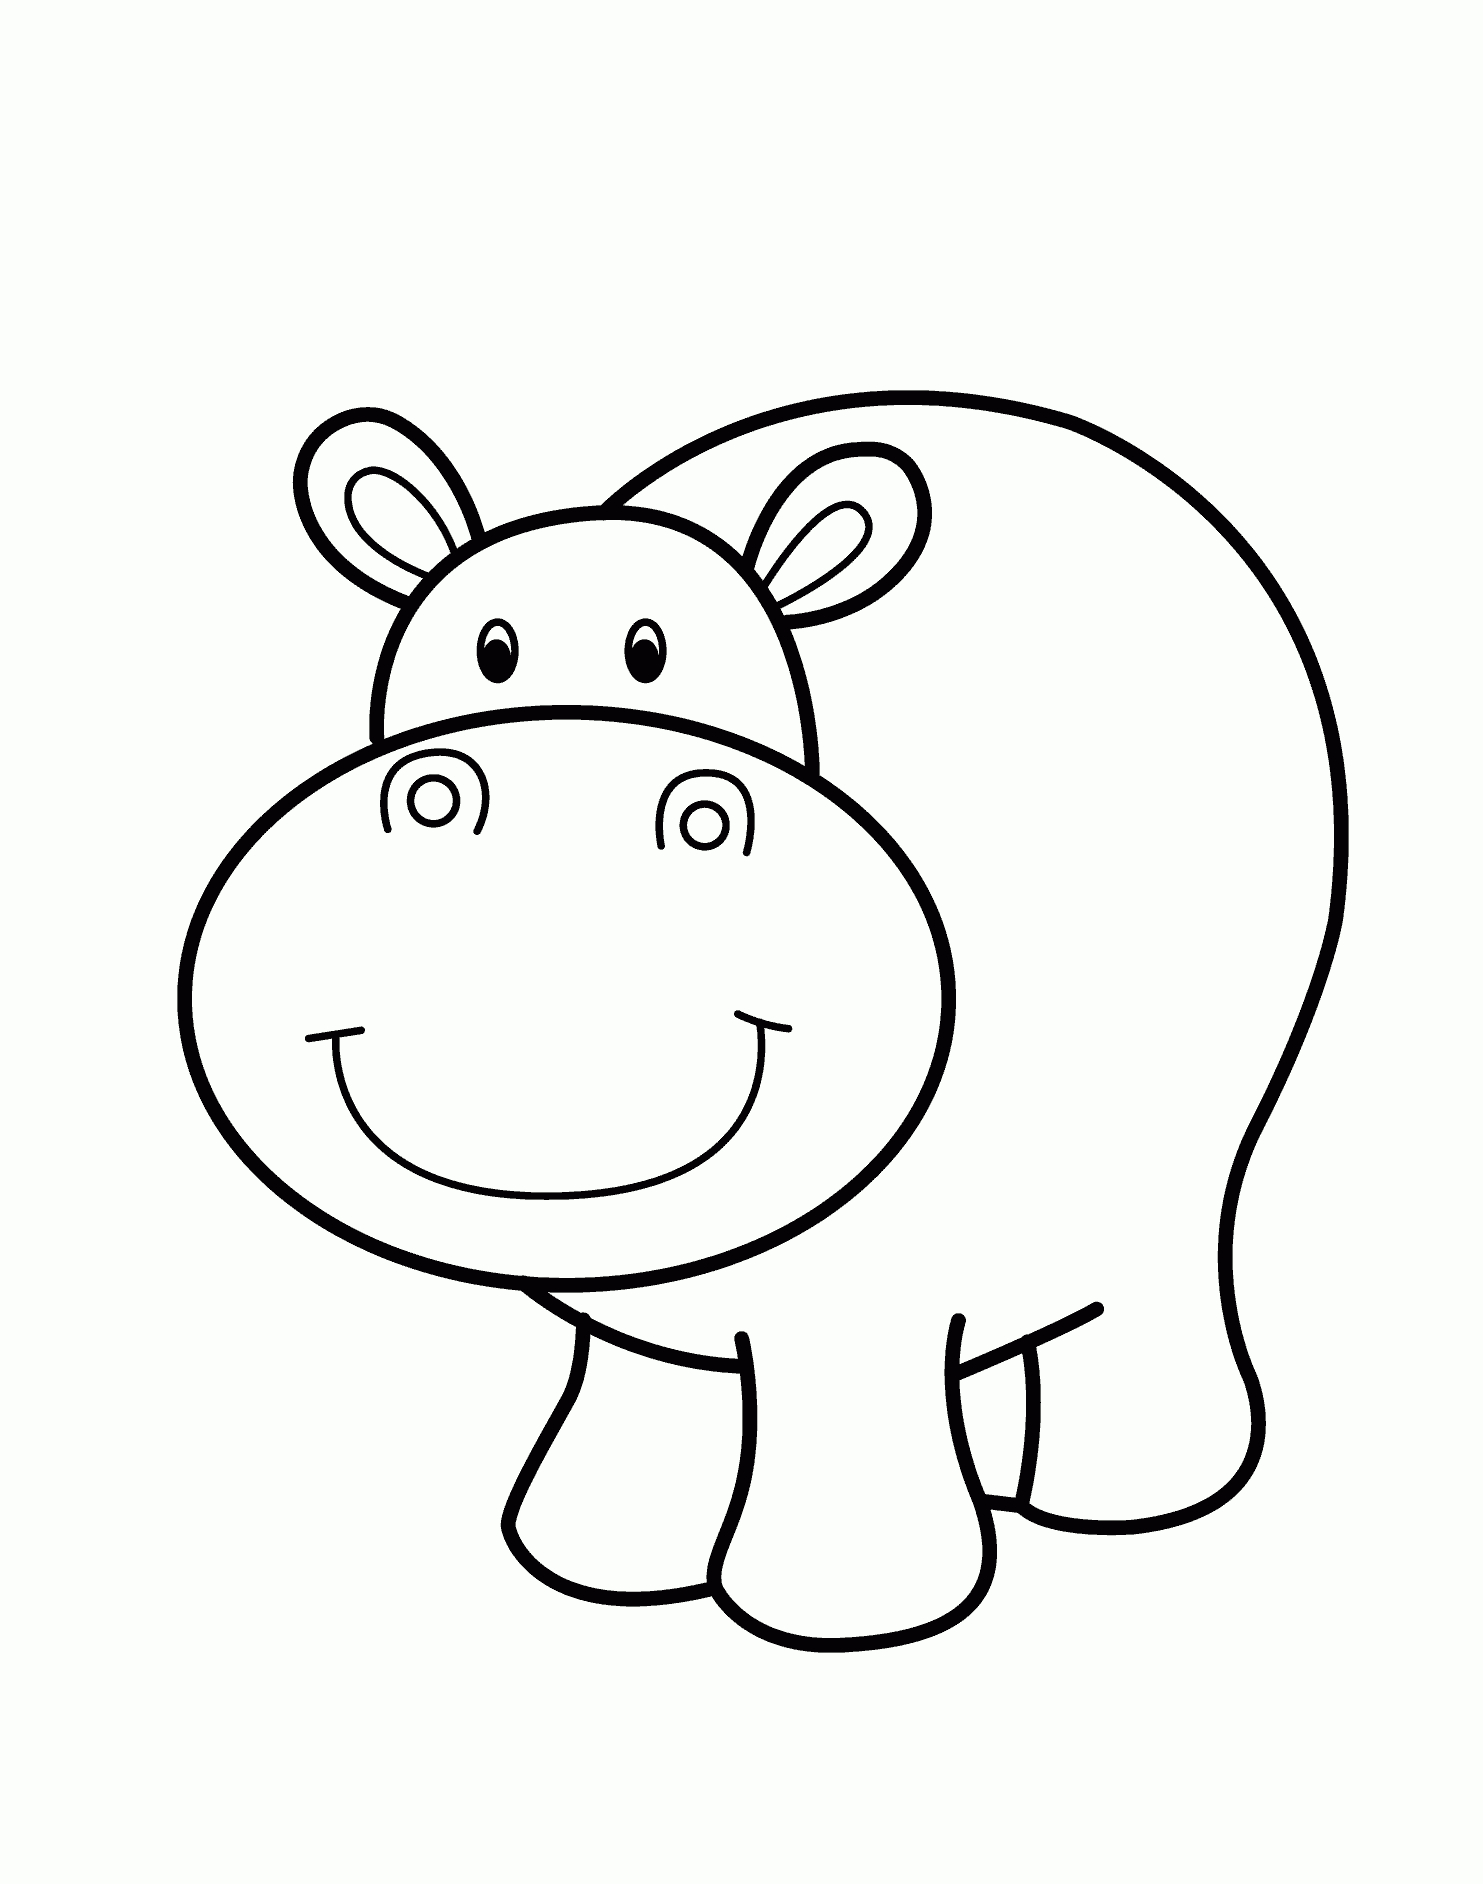 Hippo Smiling - Cartoon Animals Coloring Pages For Kids, Printable - Free Printable Hippo Coloring Pages